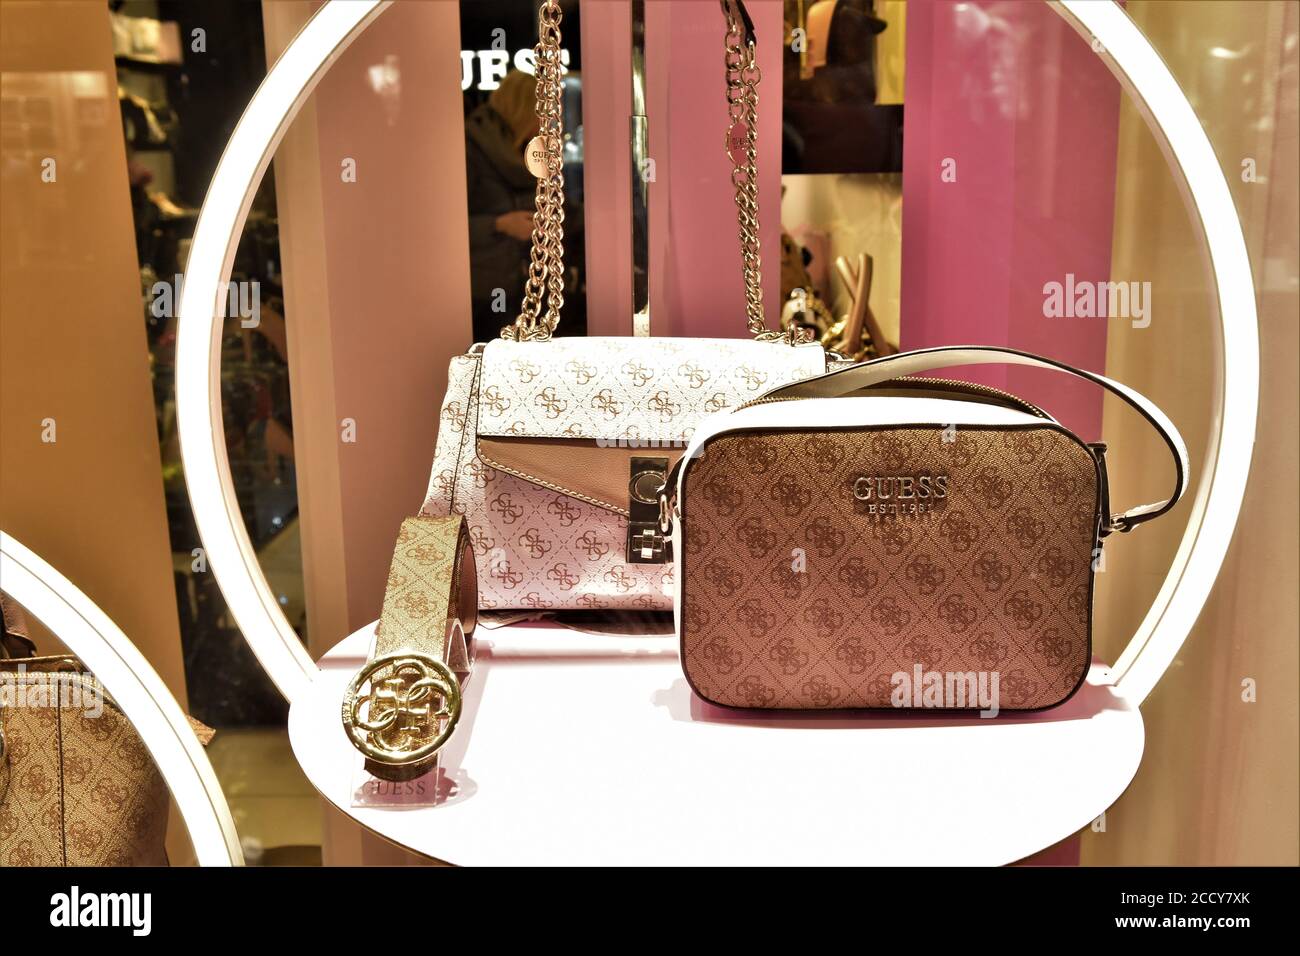 BAGS ON DISPALY AT GUESS BOUTIQUE IN FRATTINA STREET Stock Photo - Alamy